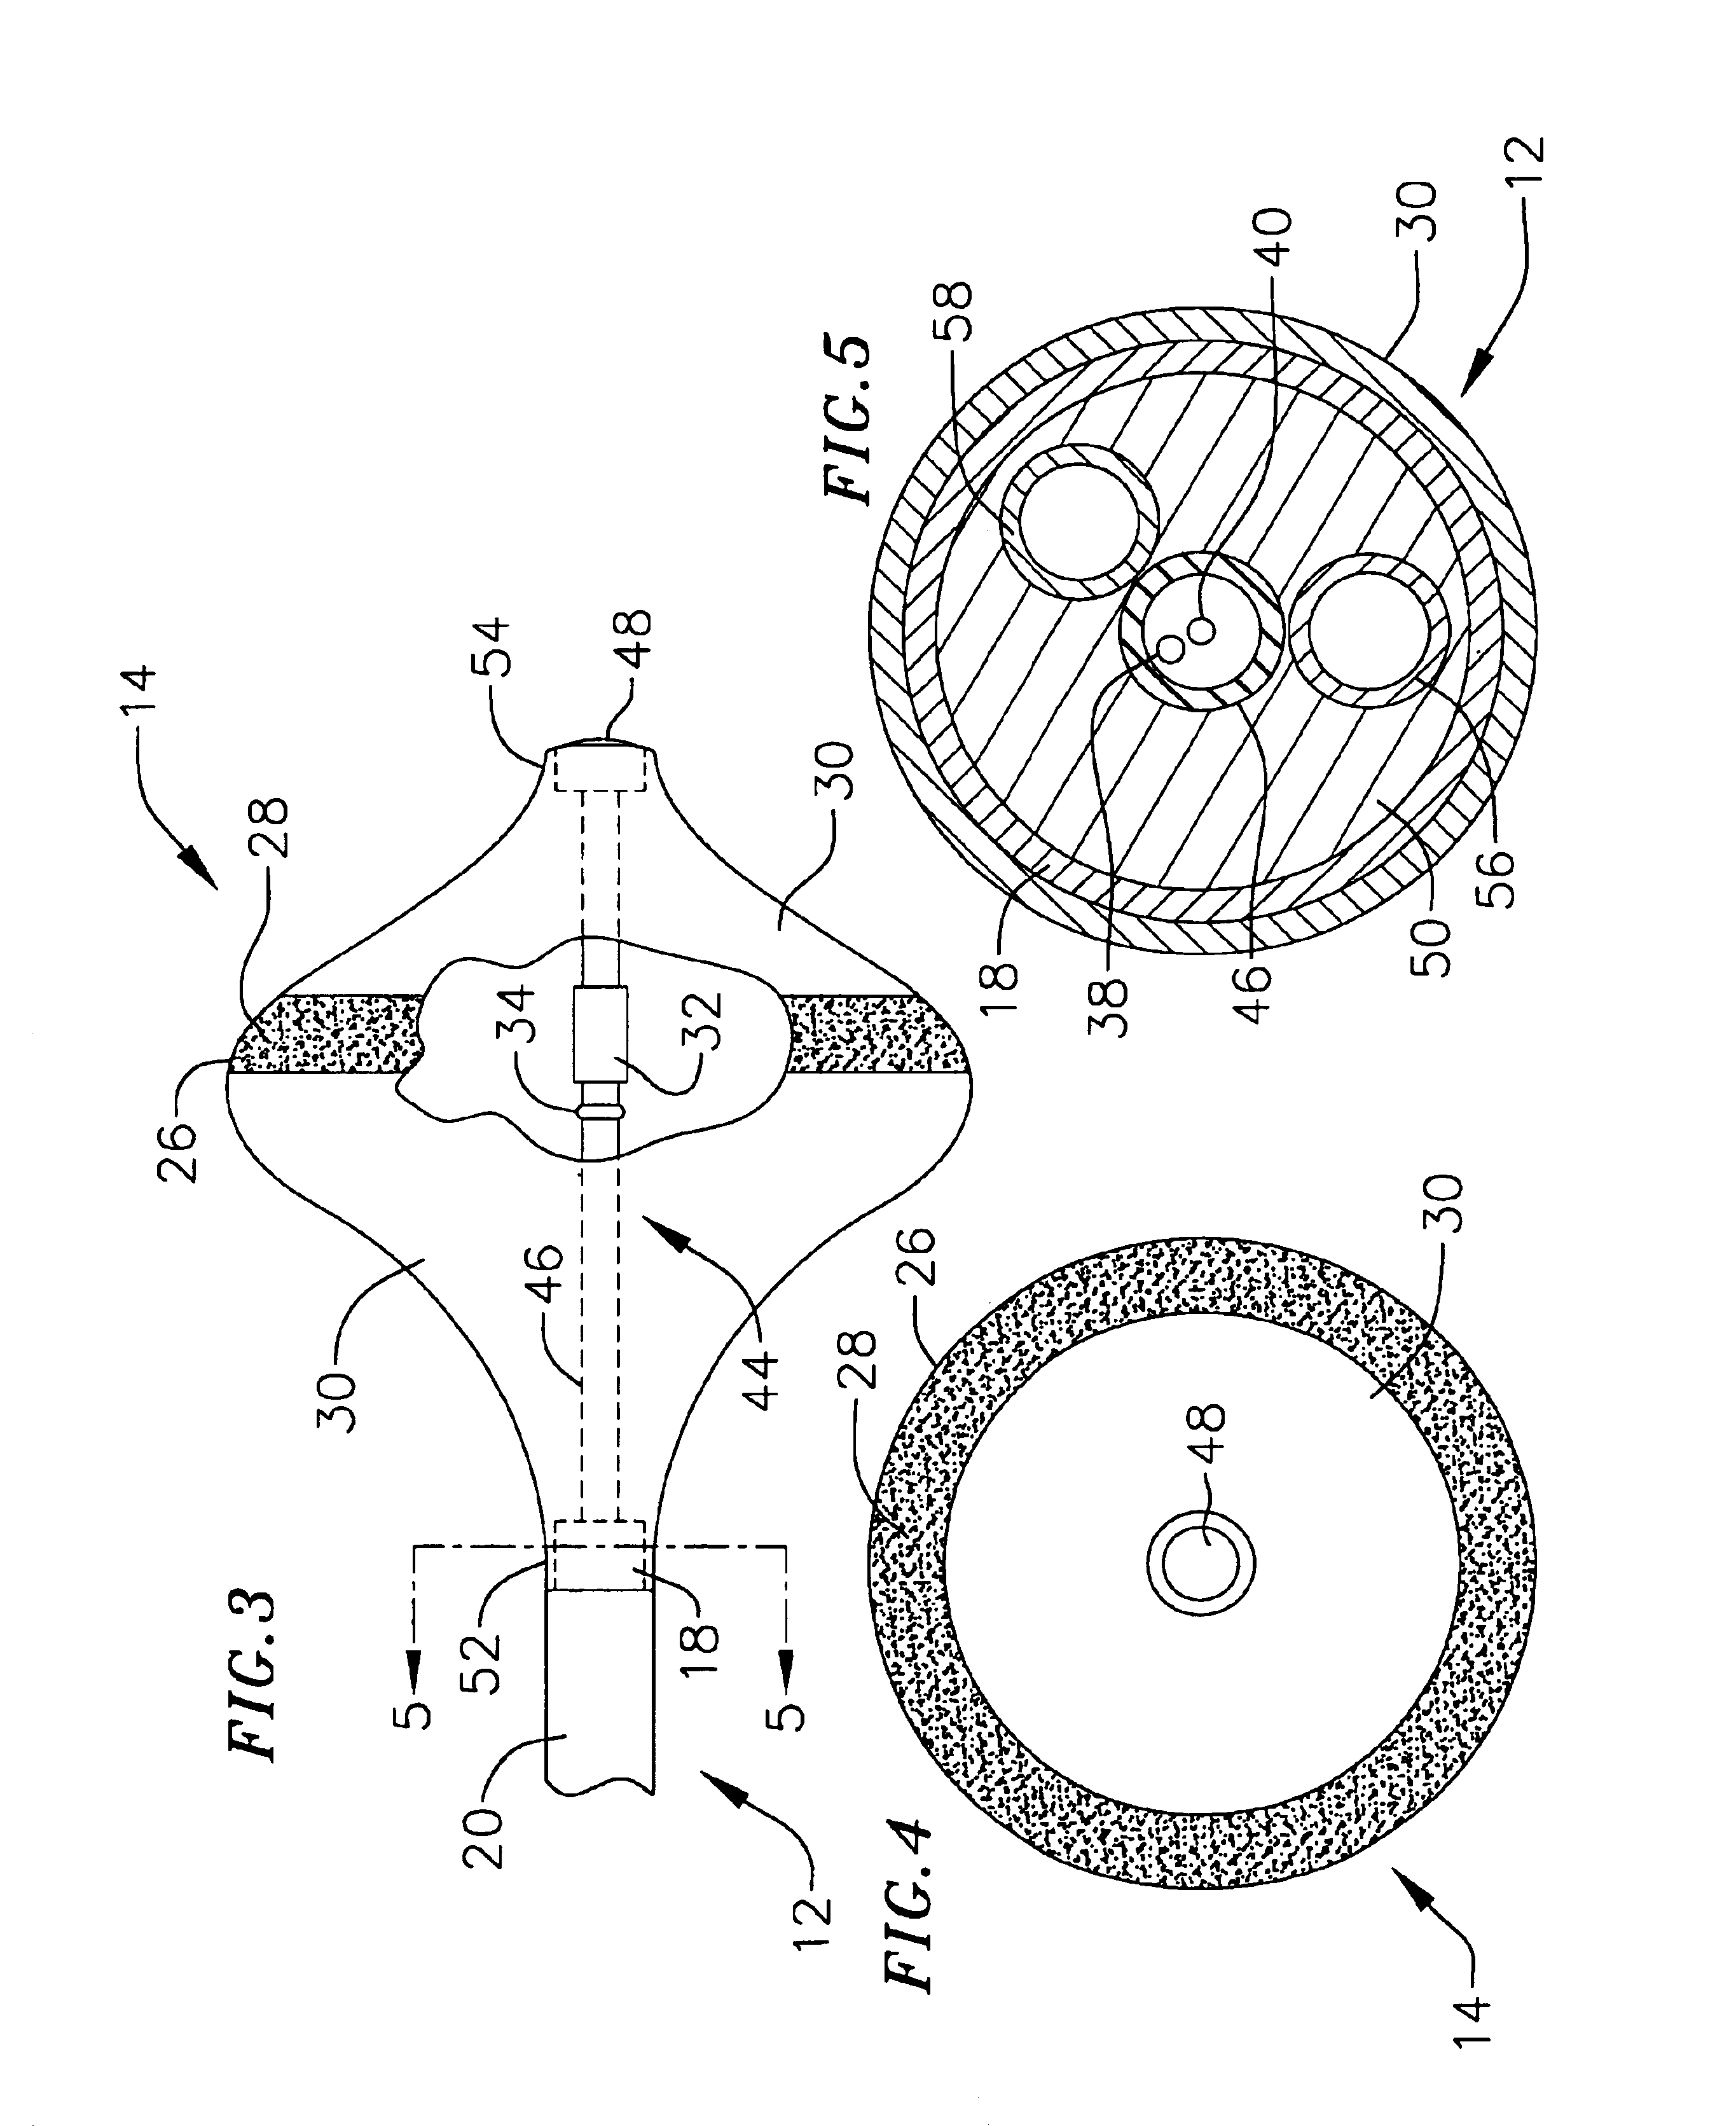 Surgical probe for supporting inflatable therapeutic devices in contact with tissue in or around body orifices and within tumors